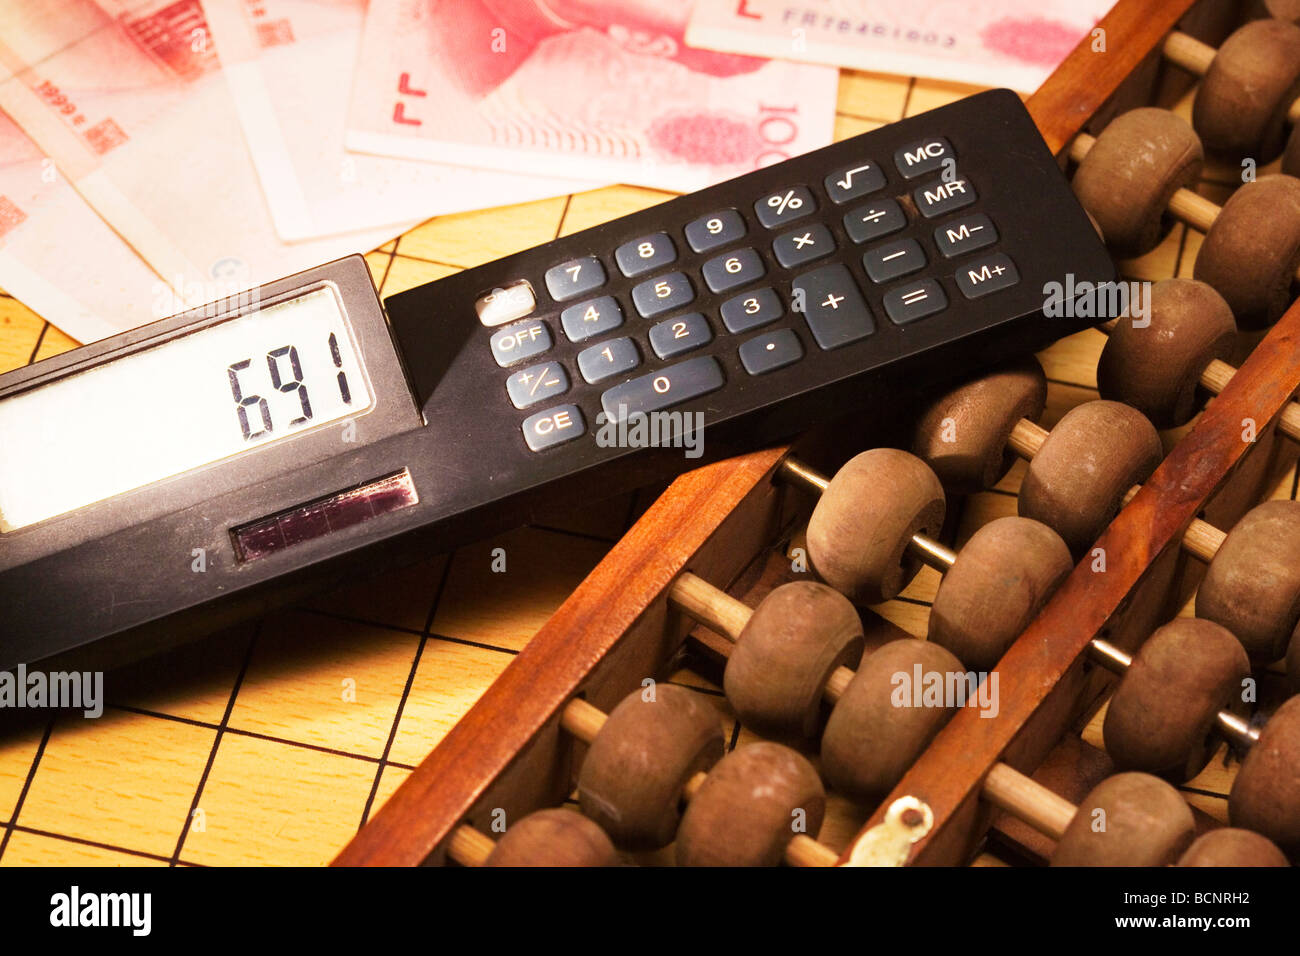 Chinese traditional calculator abacus and modern calculator with one hundred Chinese RMB bills Stock Photo